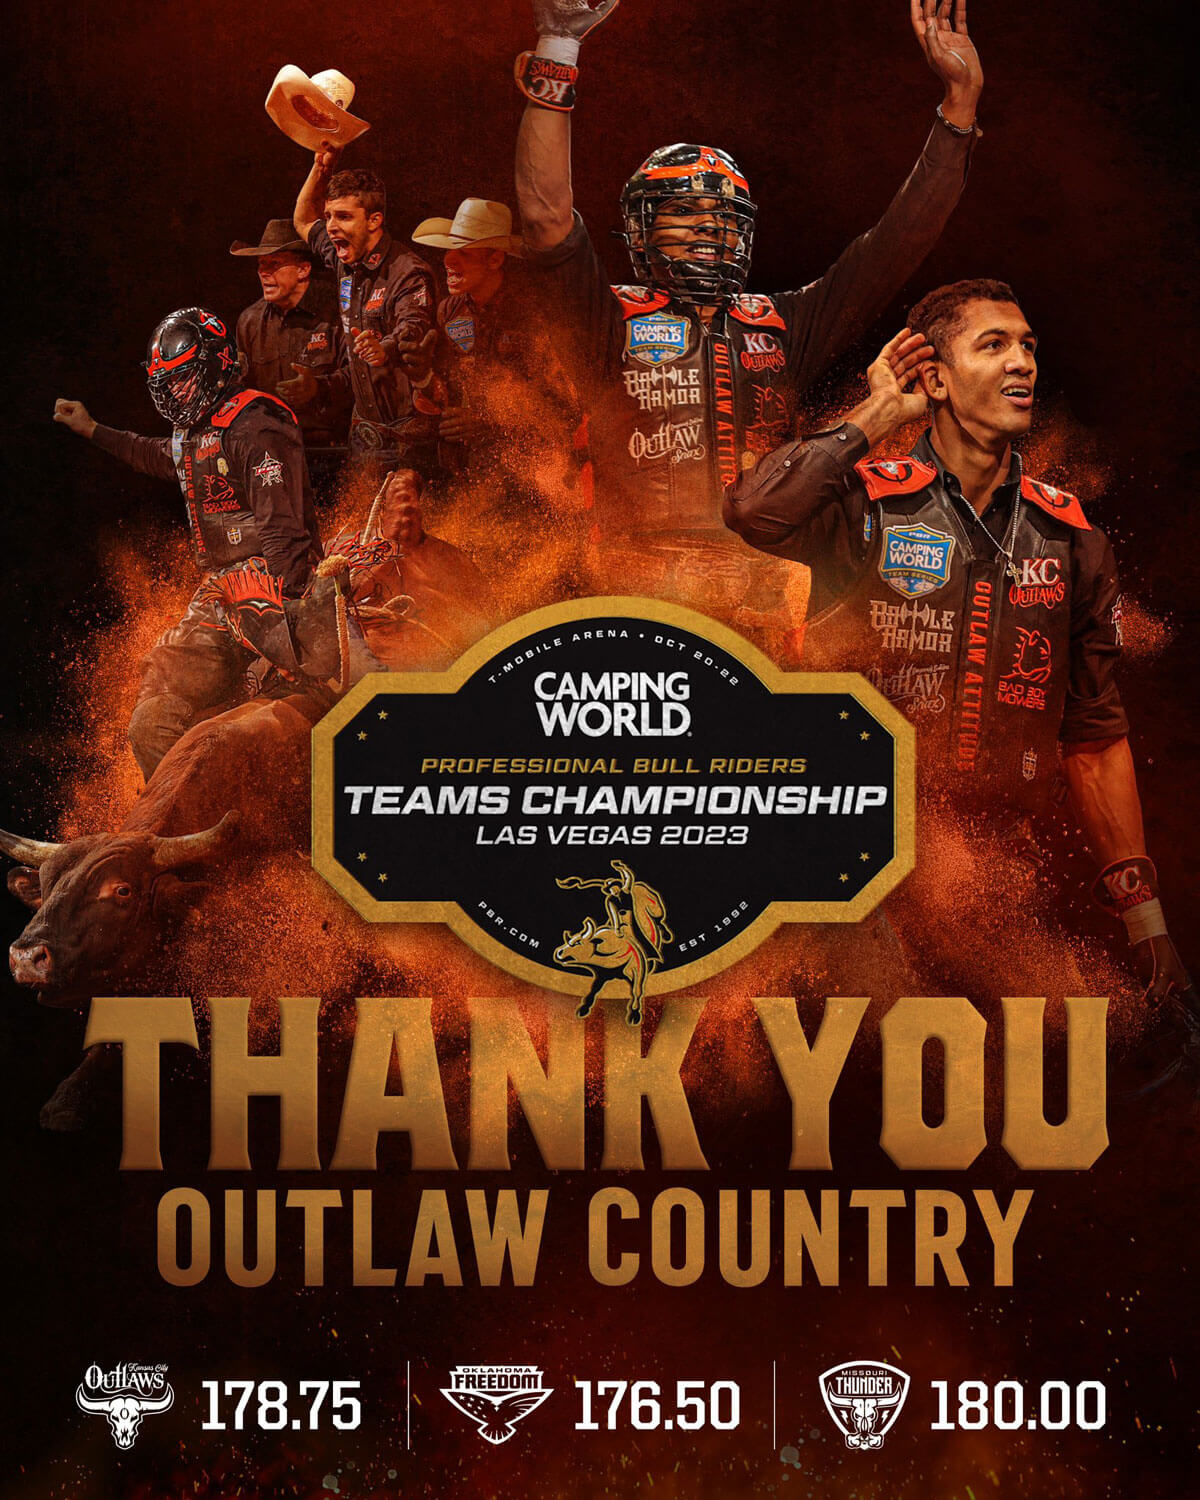 Thank You Outlaw Country!